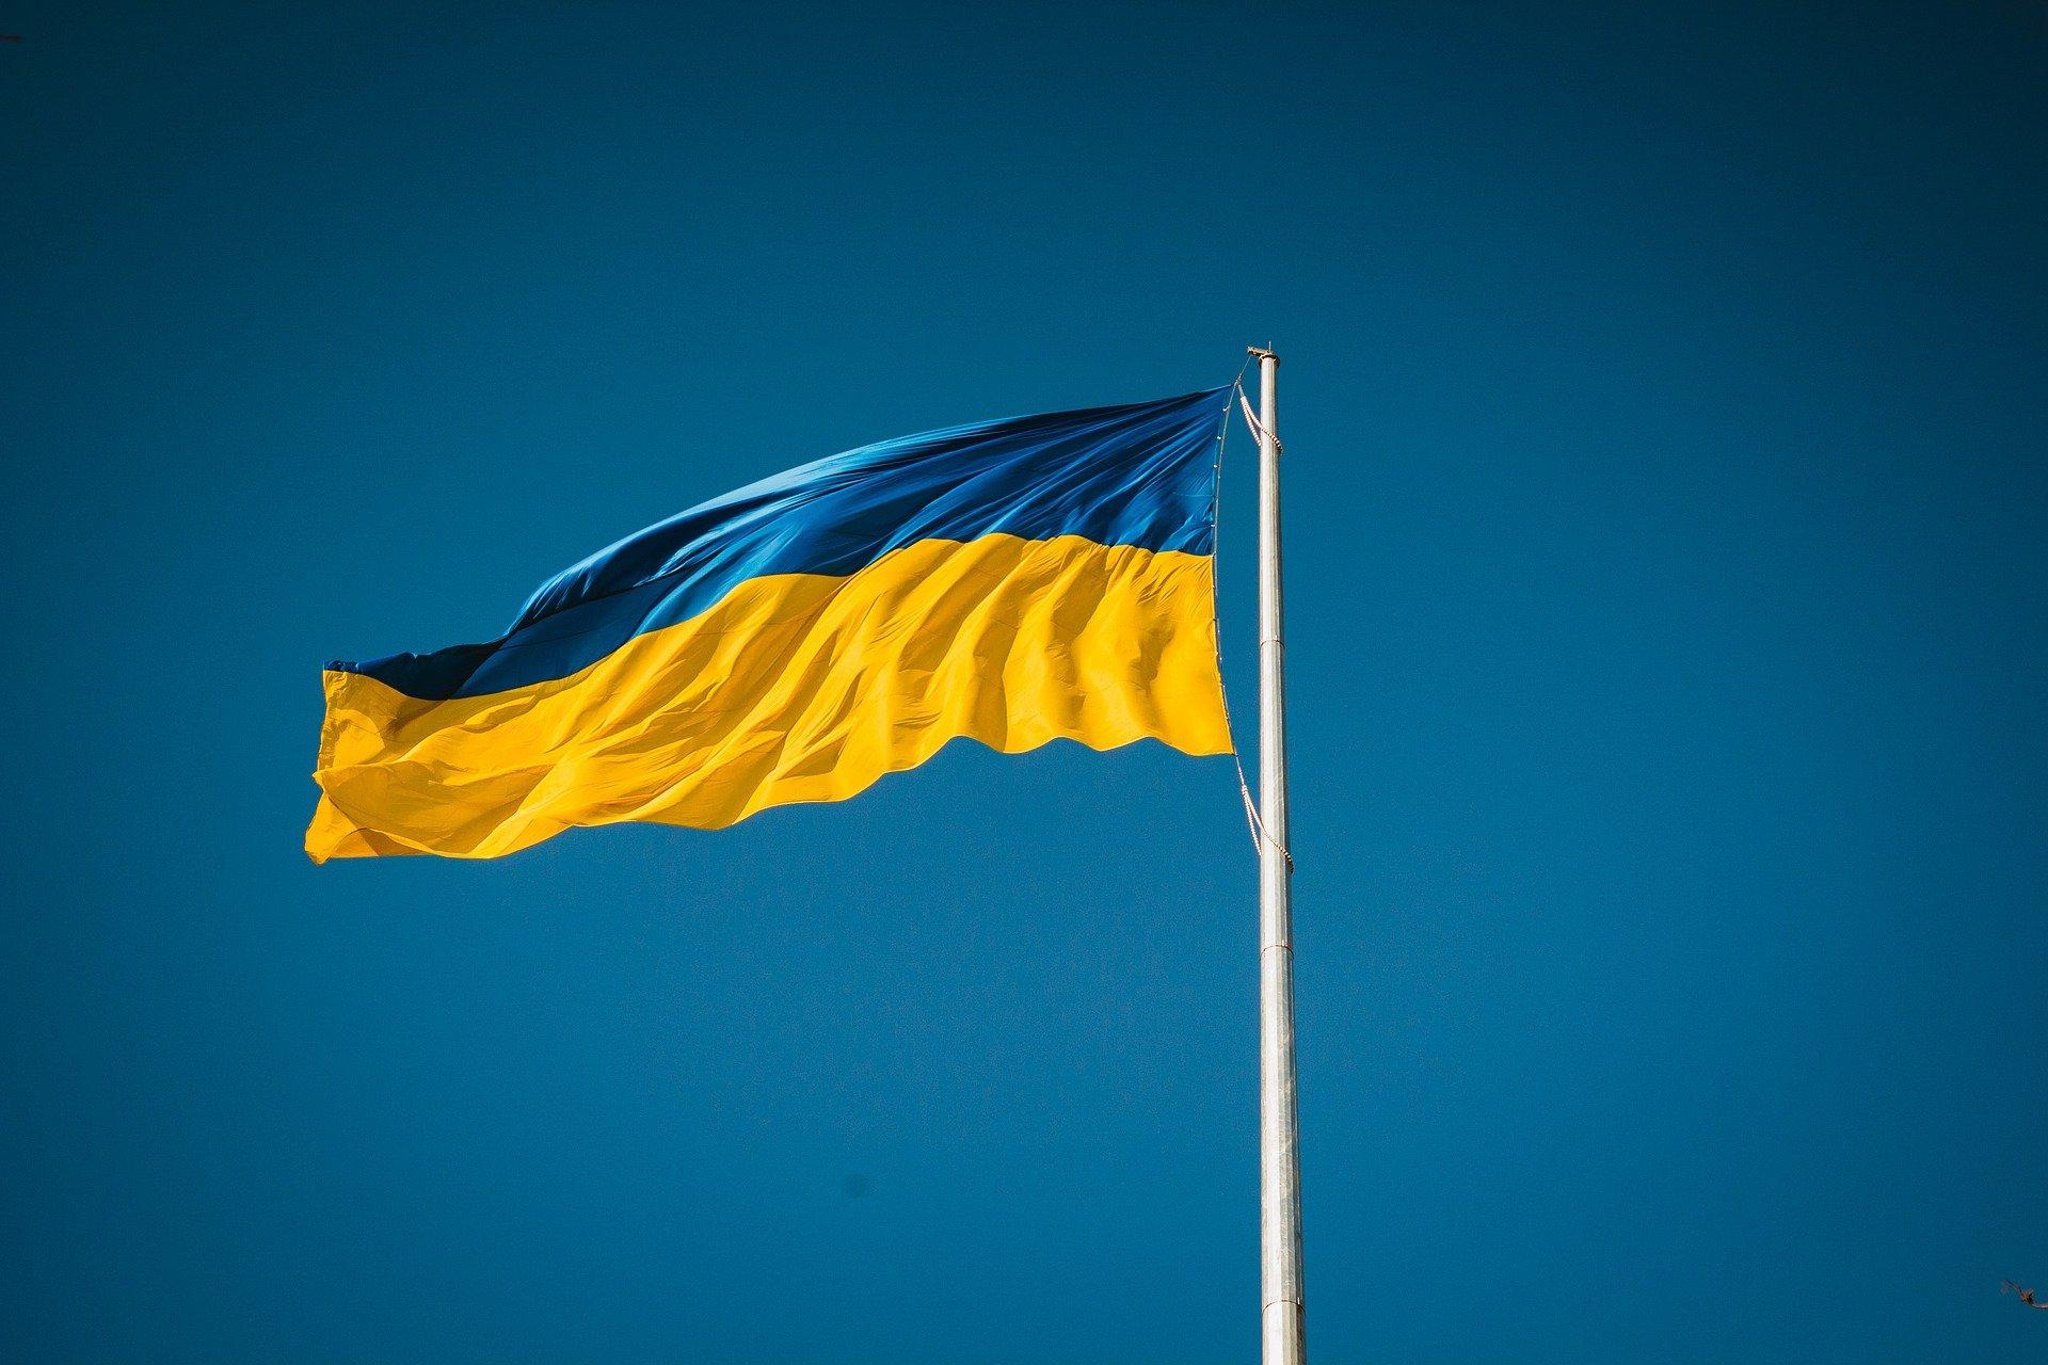 ‘Homes for Ukraine’ – Will the promised DBS checks be adequate enough? – OPINION PIECE